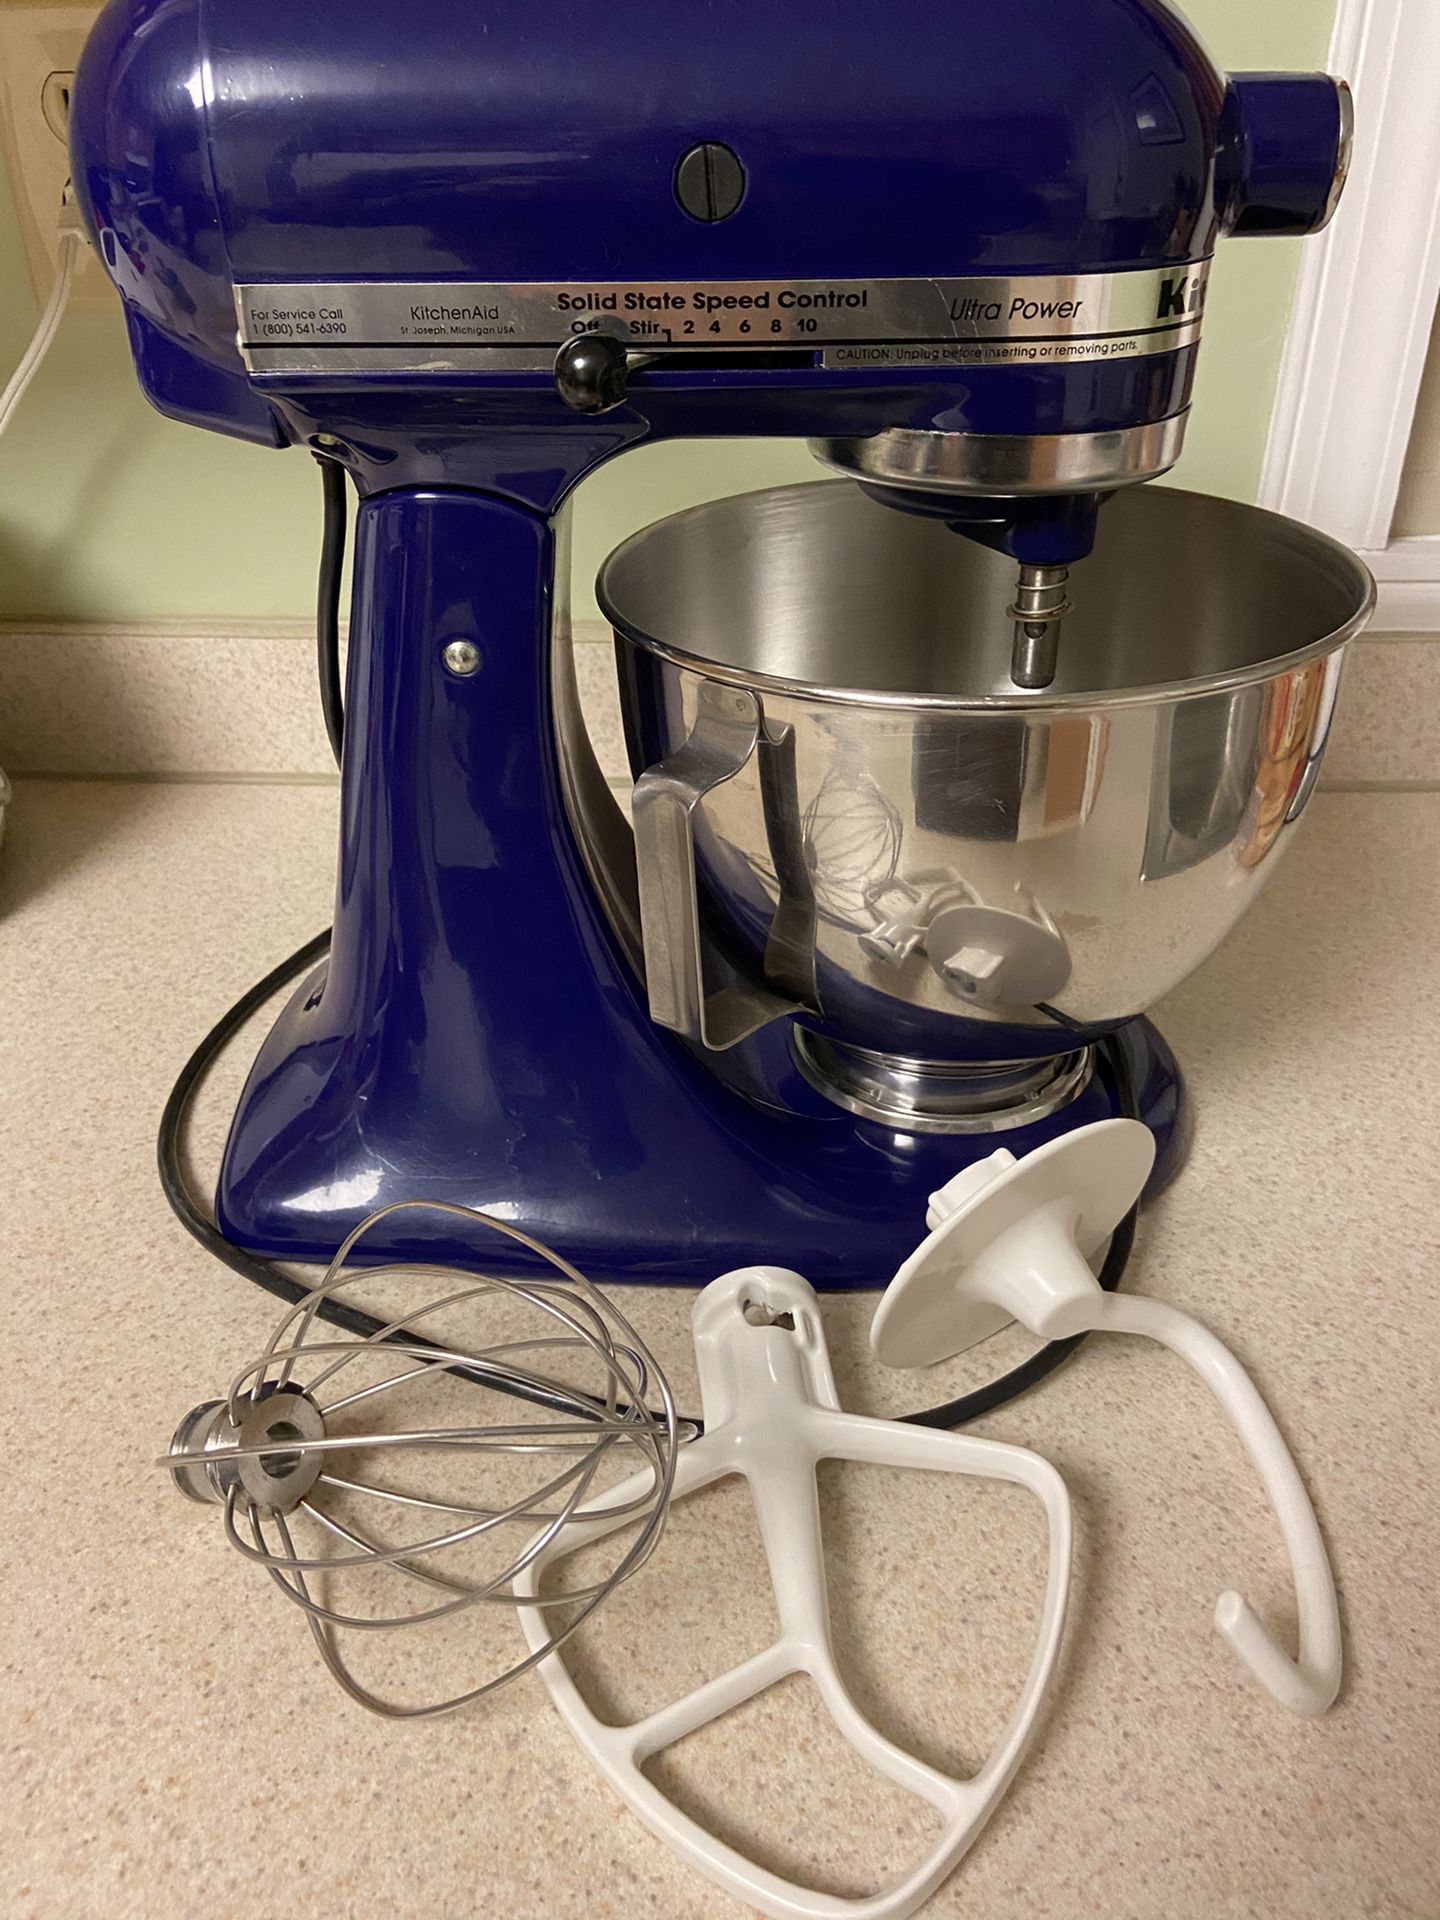 Cobalt Blue Kitchen Aid Ultra Power stand mixer with stainless bowl and 3 attachments.